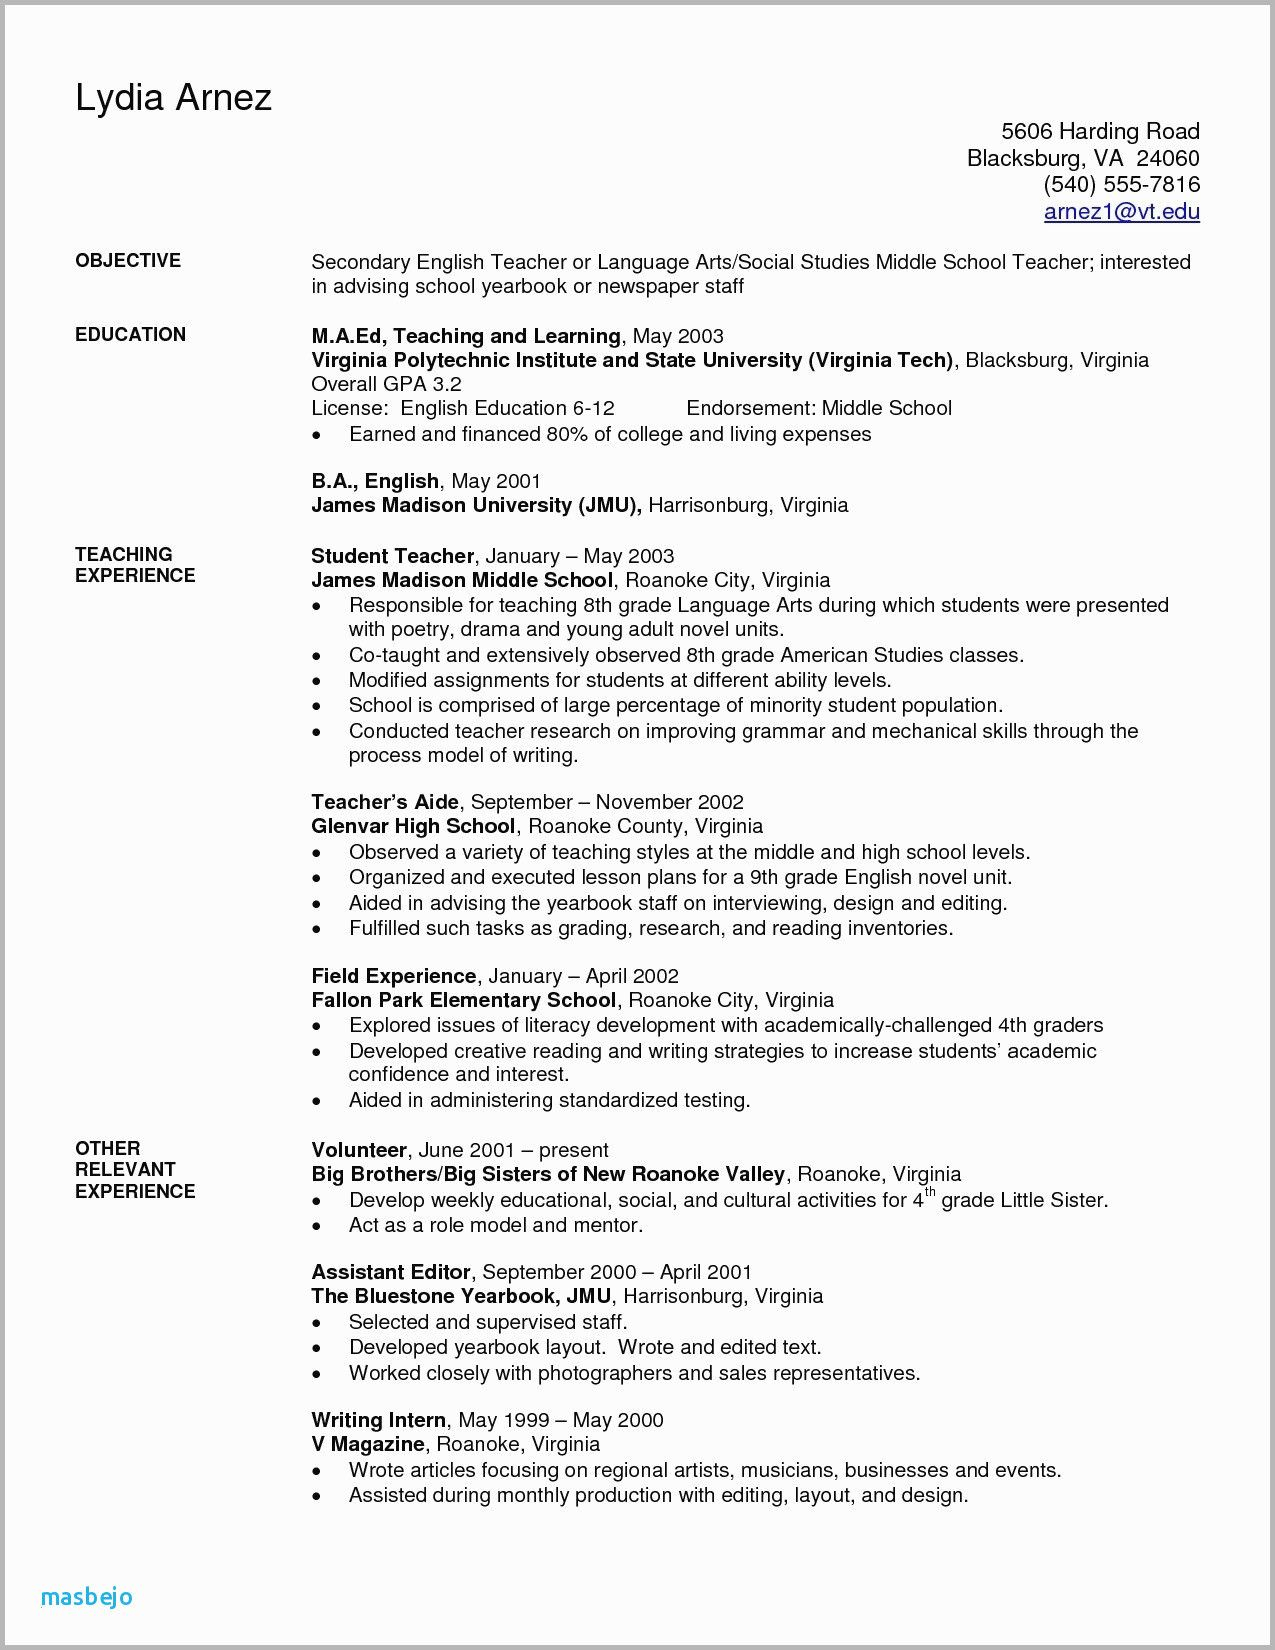 77 Luxury Images Of Government Employee Resume Examples Humas intended for proportions 1275 X 1650